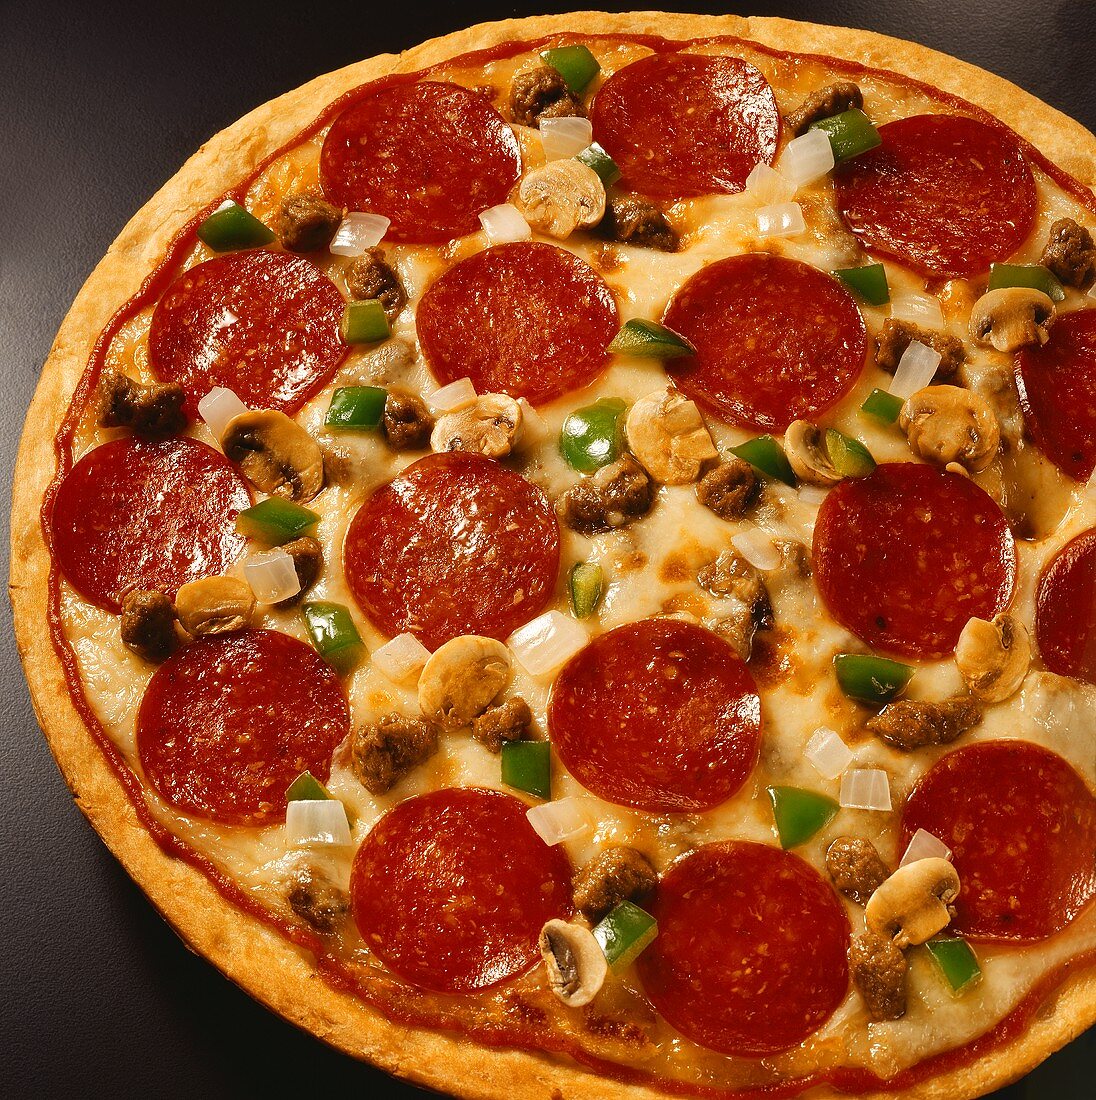 Pizza with Pepperoni, Sausage and Vegetables